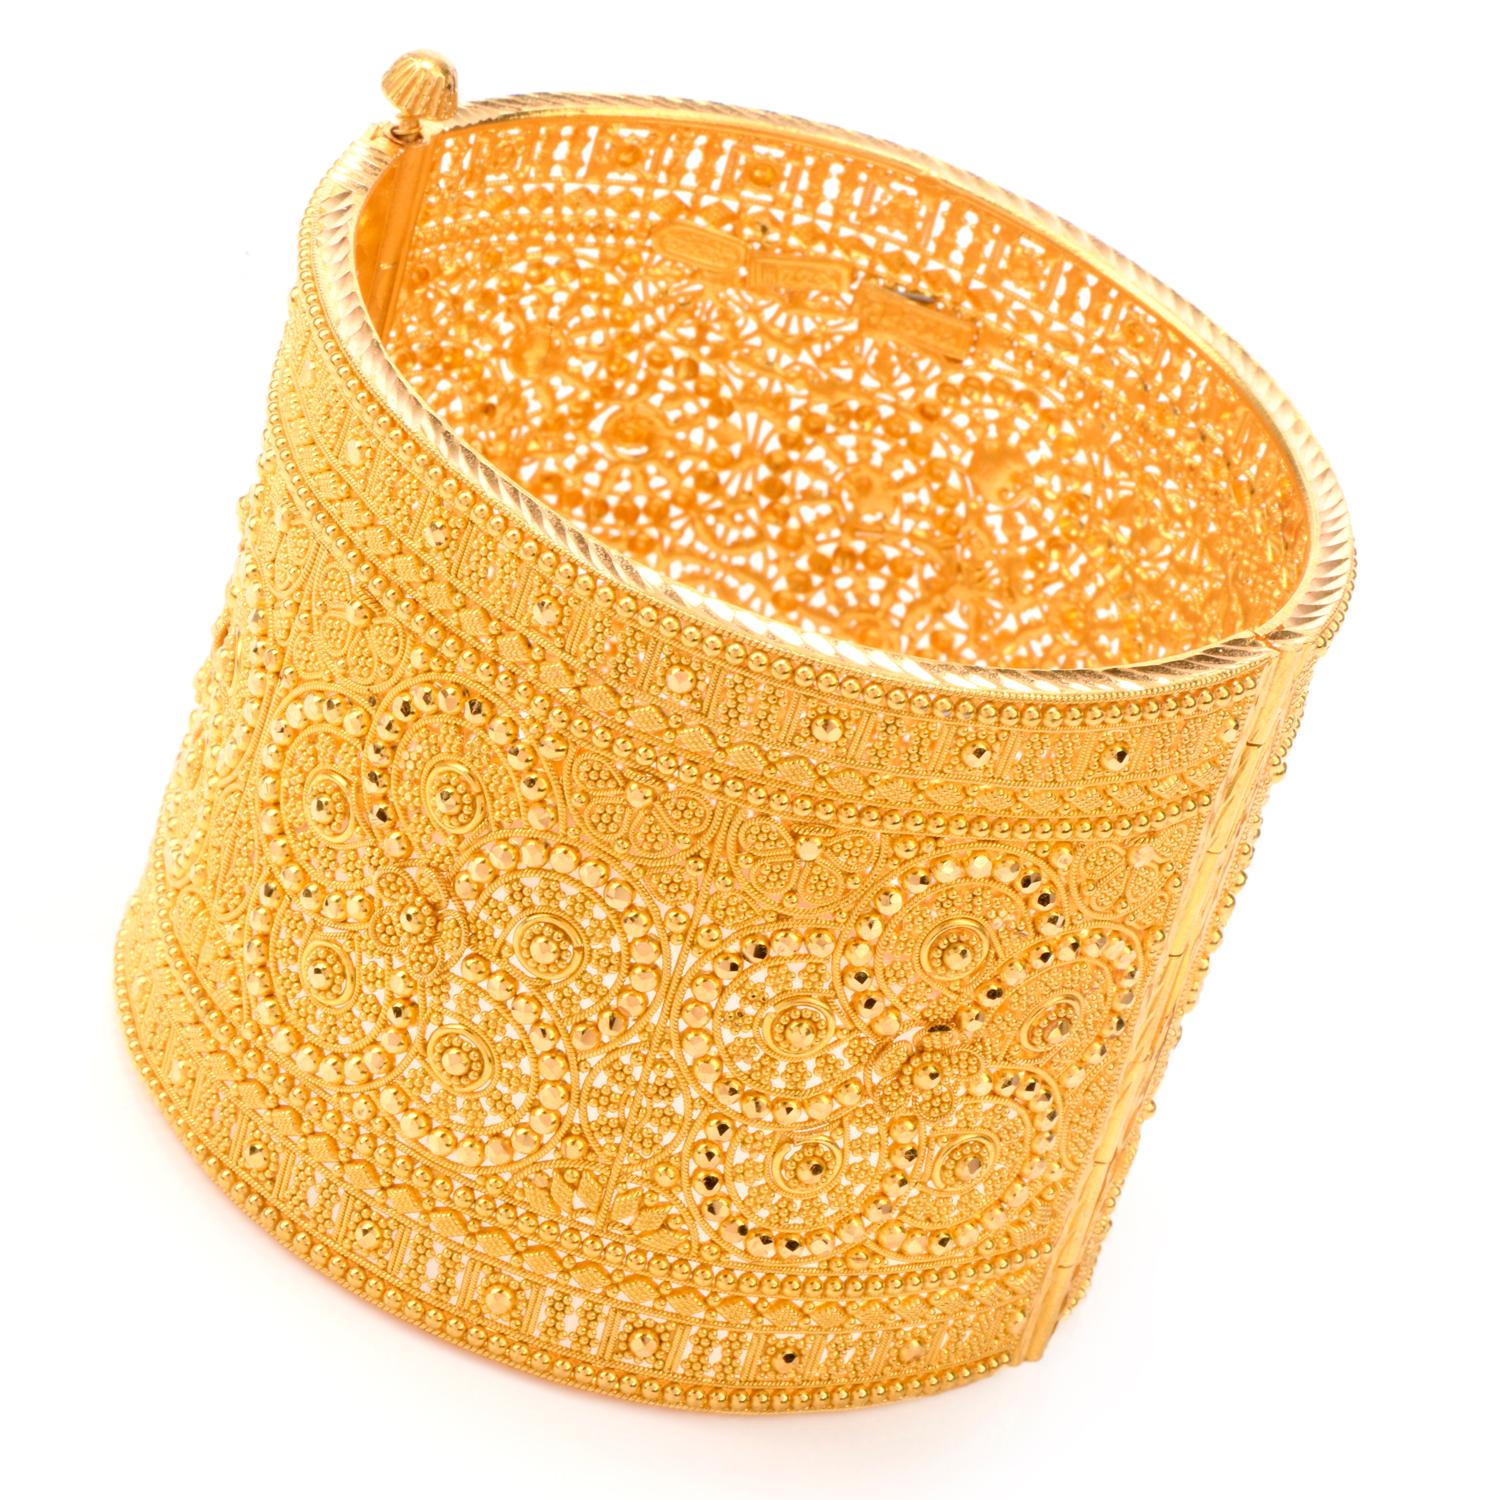 A solid 18k yellow gold  bangle bracelet. This  geometric lace design bracelet will fit approximately a 6